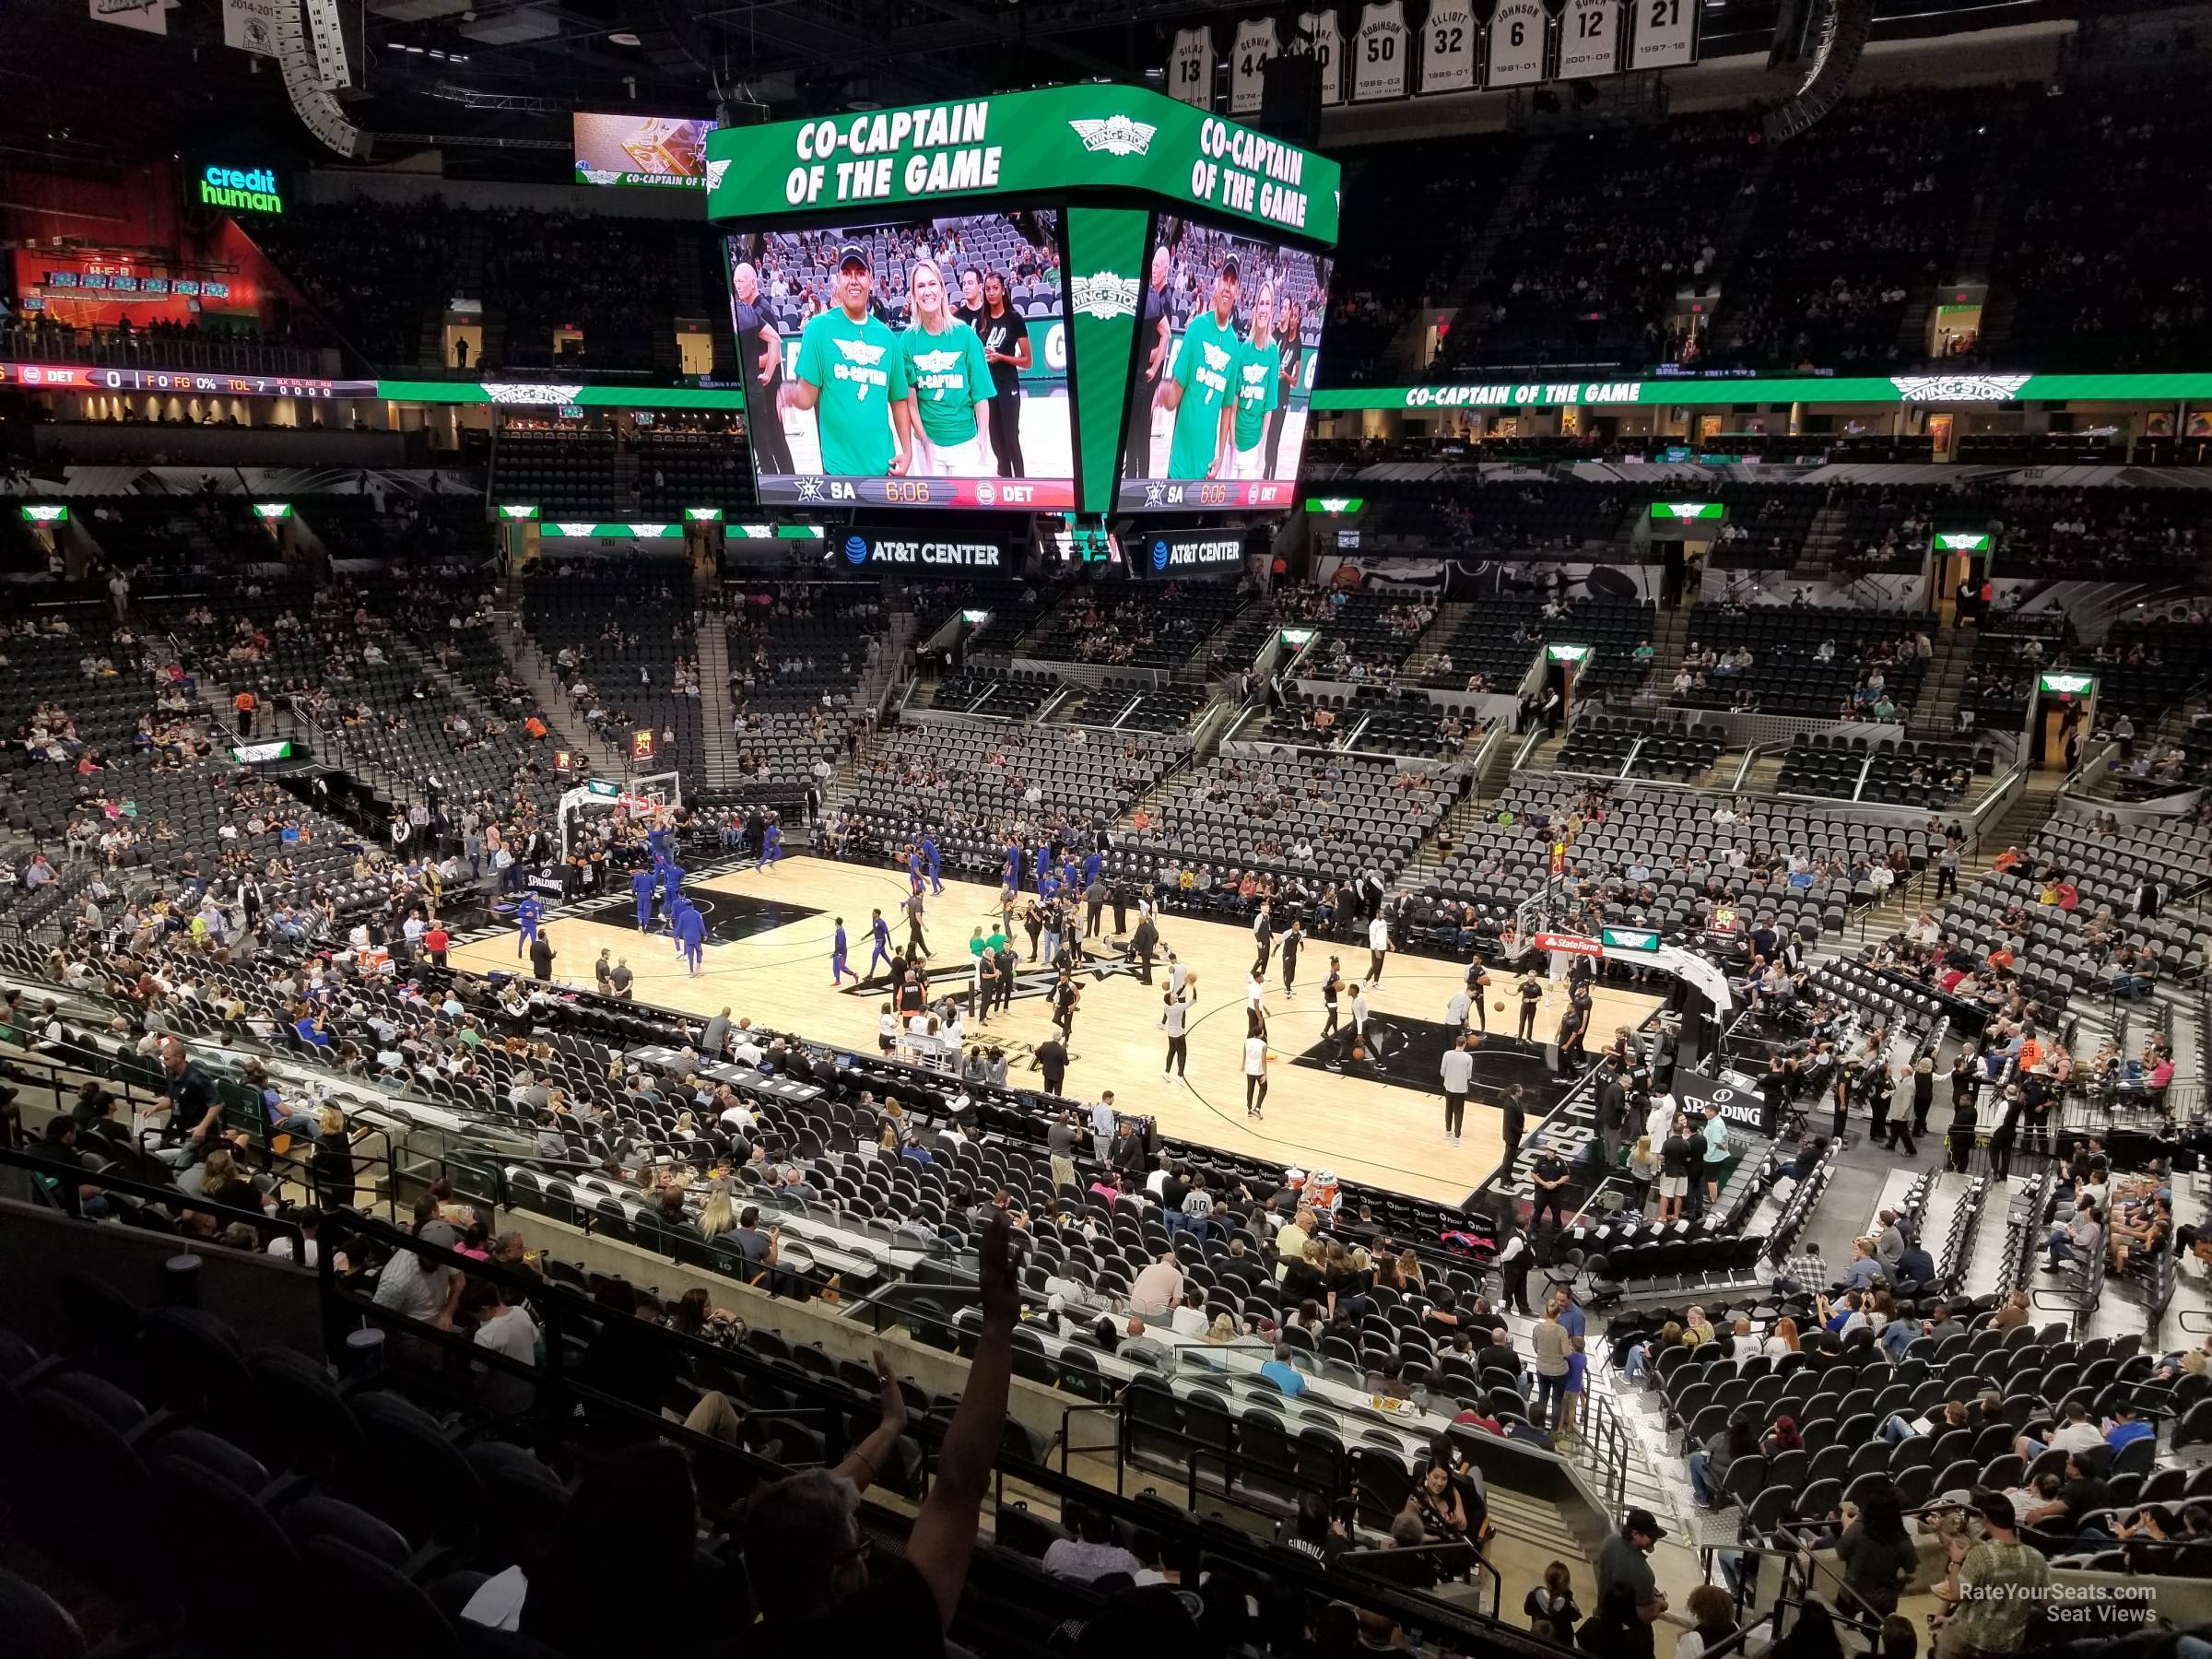 section 105, row 33 seat view  for basketball - at&t center